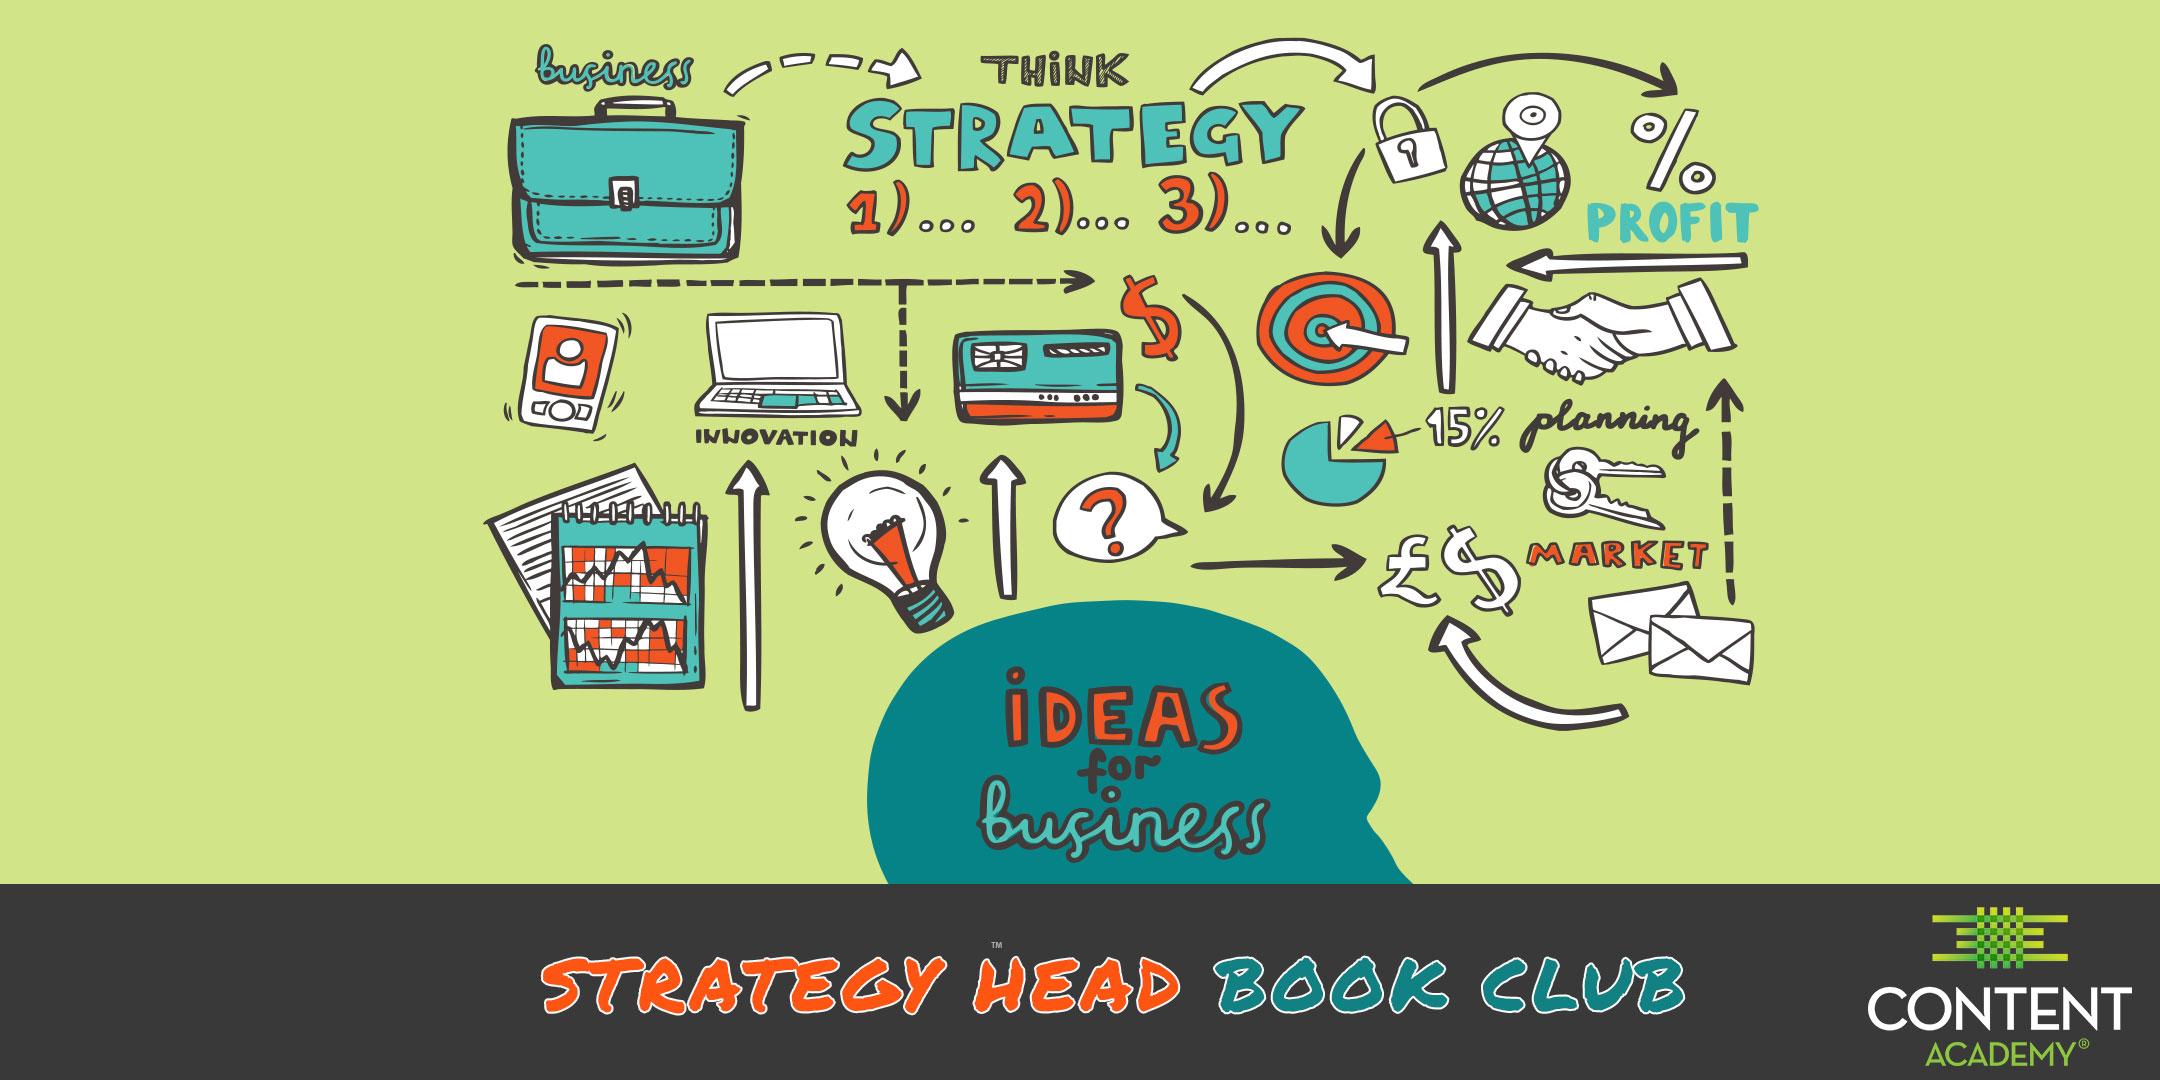 Strategy Head - Business Strategy Book Club by Content Academy®